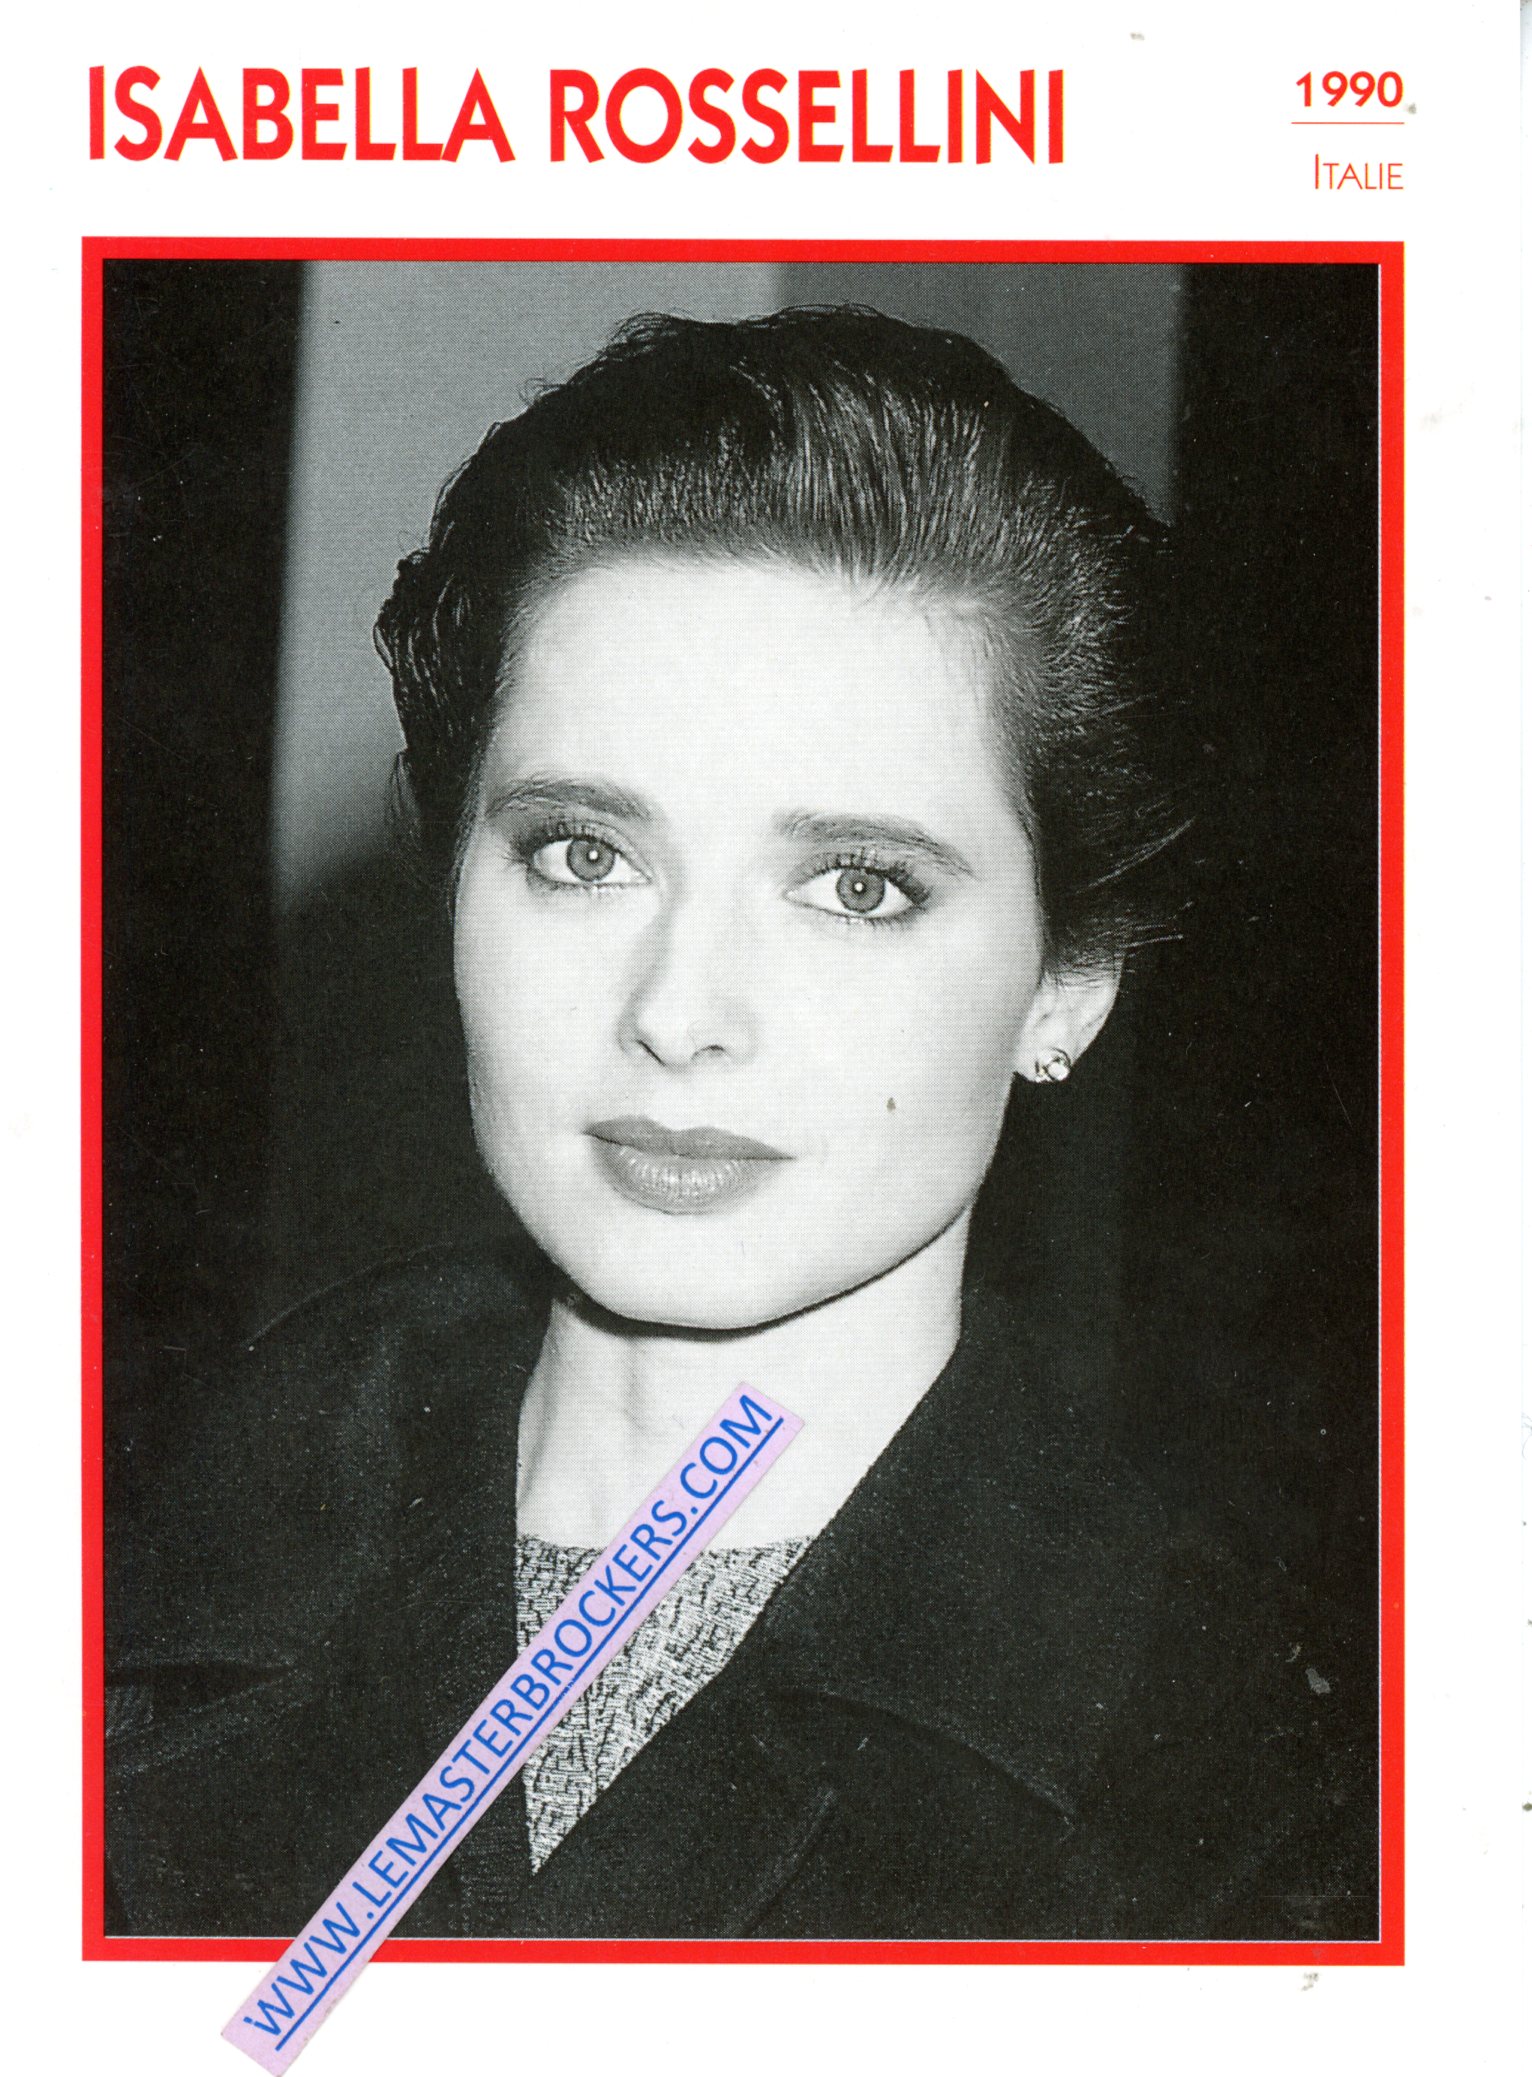 FICHE ACTRICE ISABELLE ROSSELLINI 1990